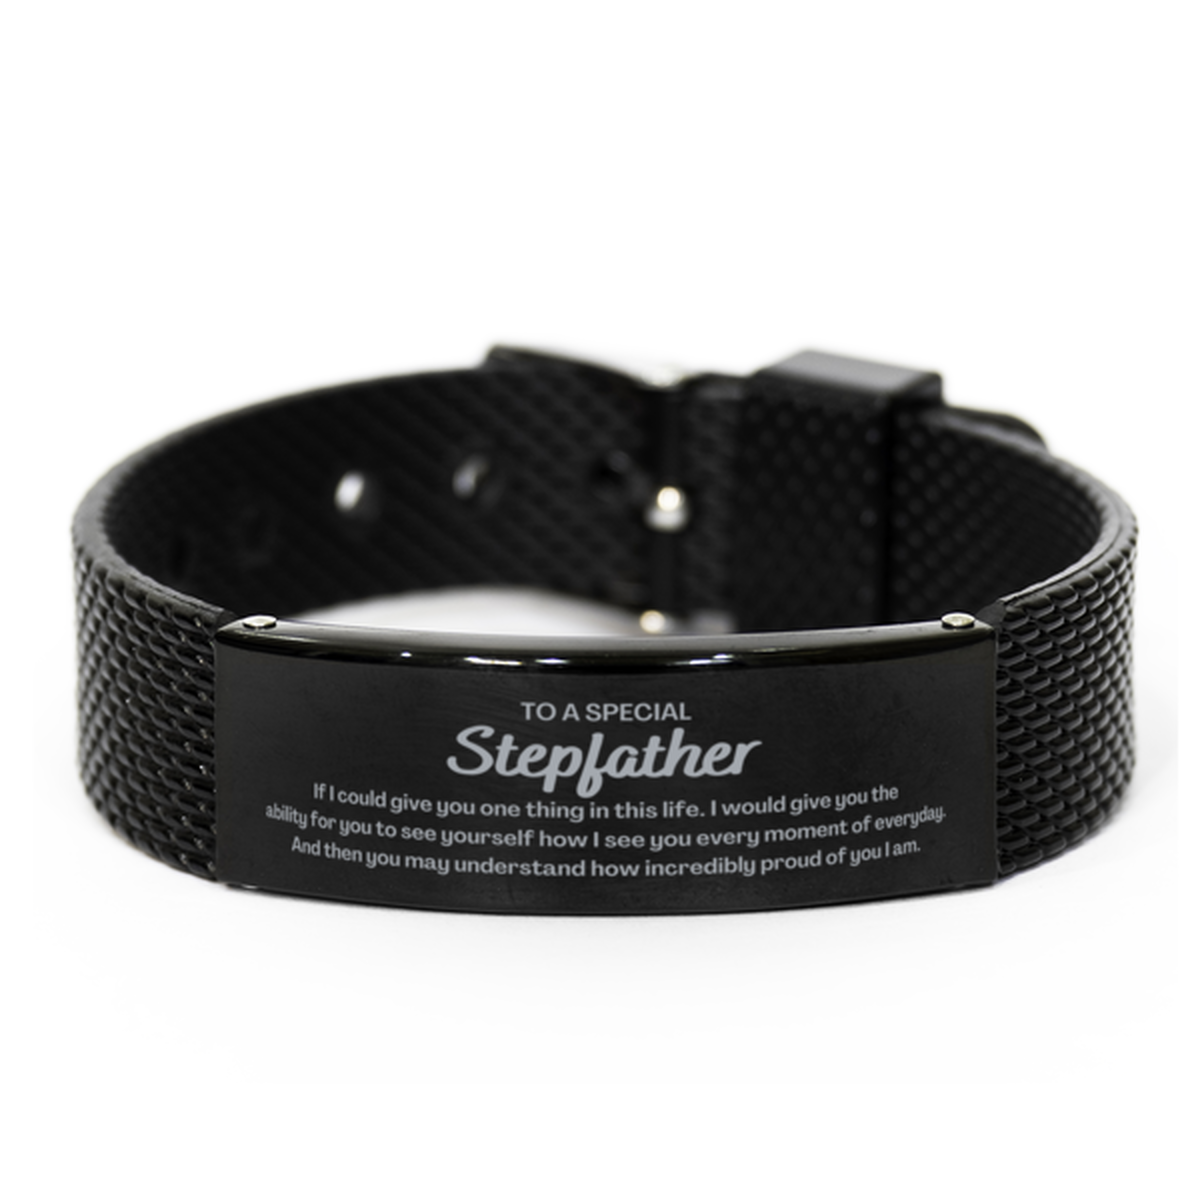 To My Stepfather Black Shark Mesh Bracelet, Gifts For Stepfather Engraved, Inspirational Gifts for Christmas Birthday, Epic Gifts for Stepfather To A Special Stepfather how incredibly proud of you I am